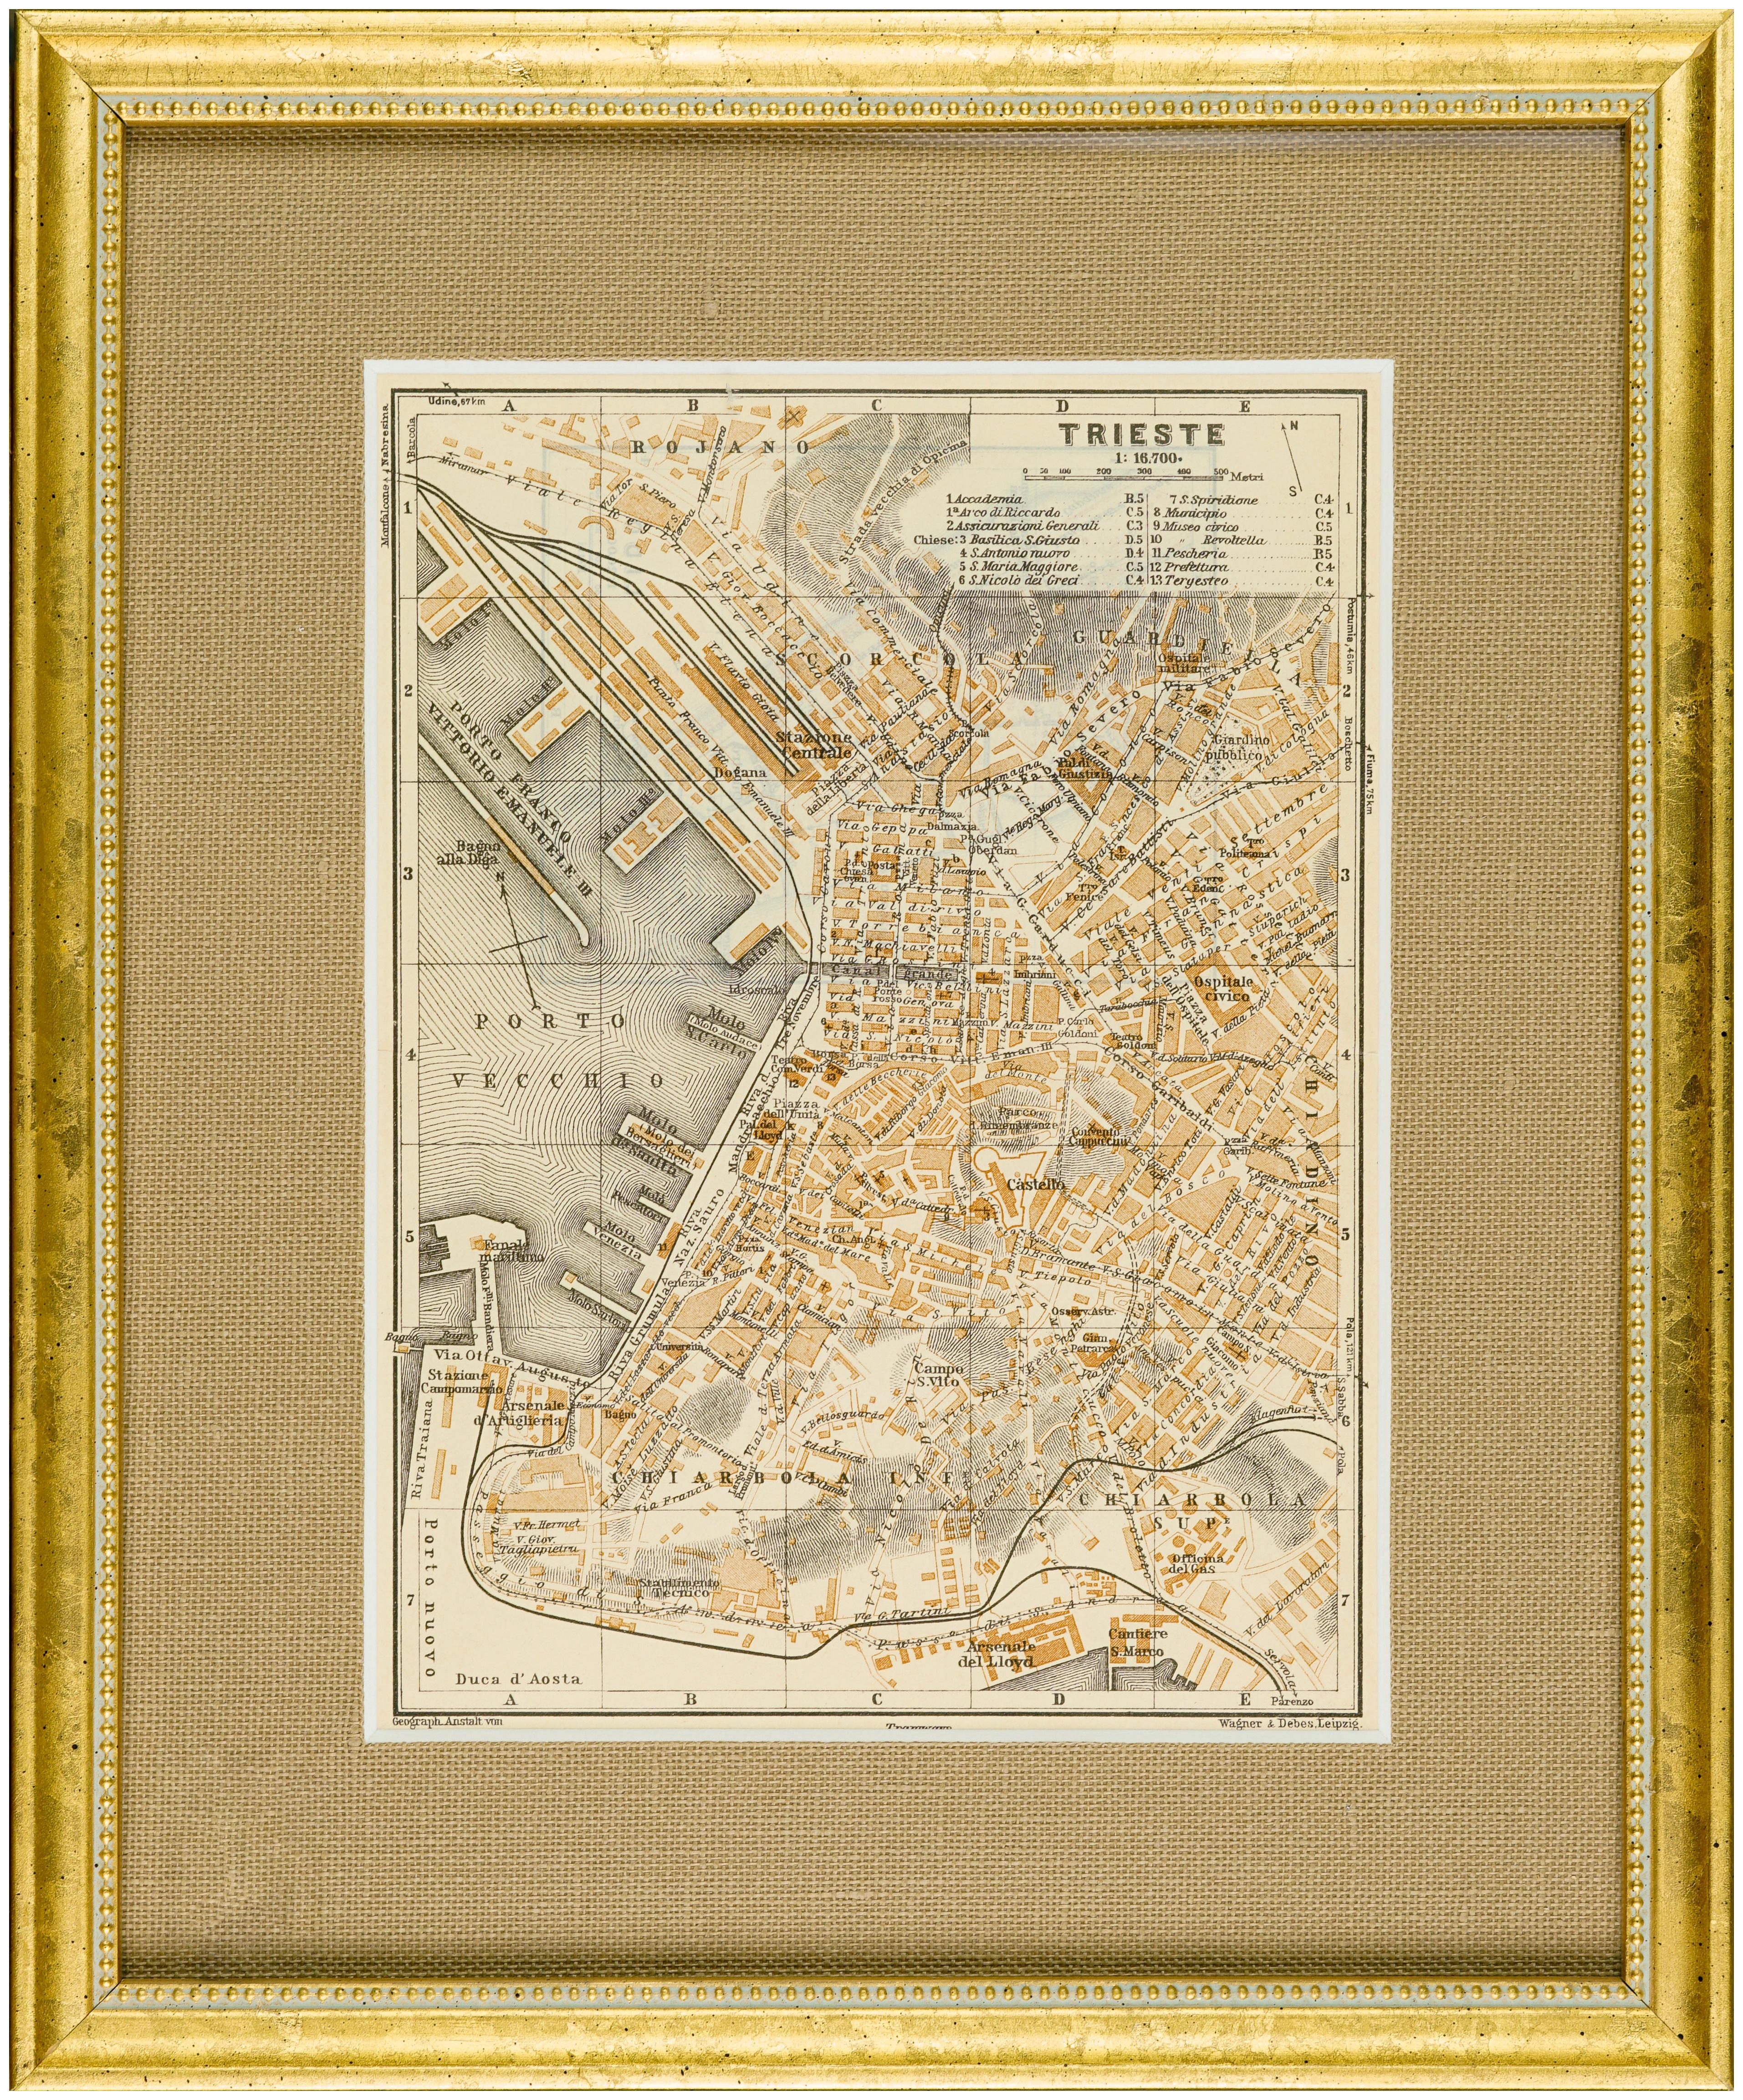 Unknown Landscape Print - 1928 Map of Trieste, Italy